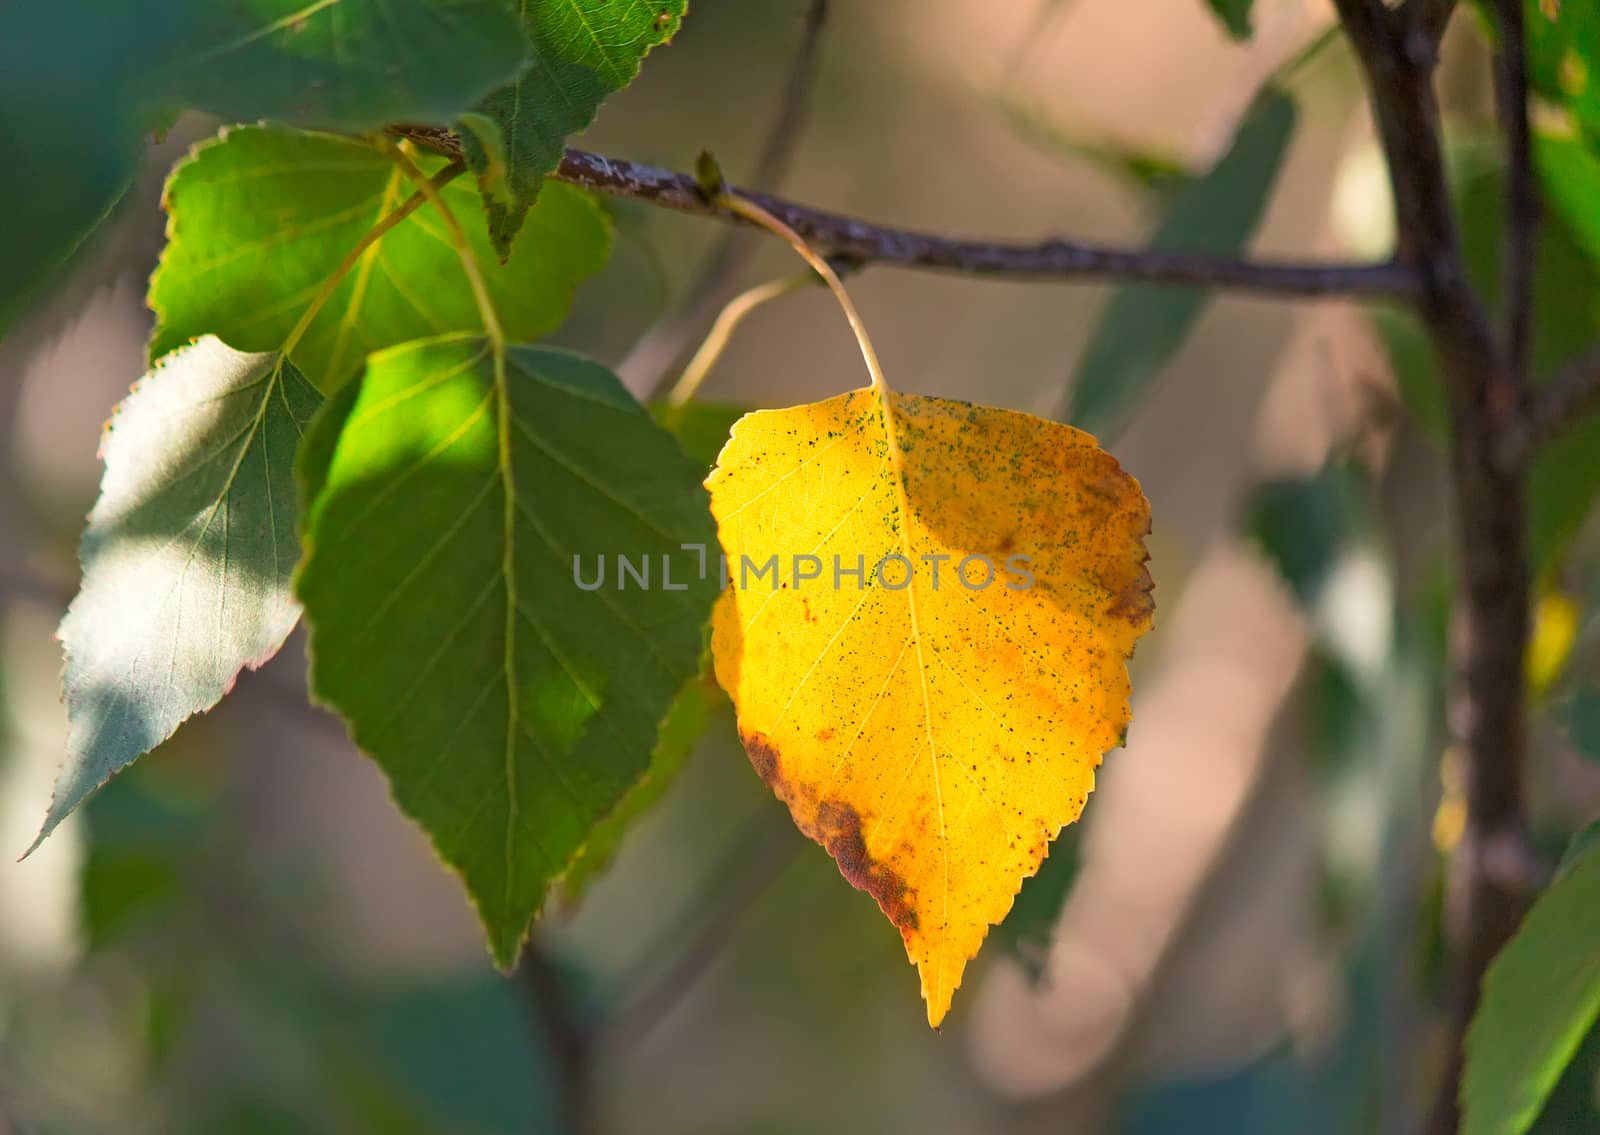 The first yellow leaf on the branches of birch. by georgina198